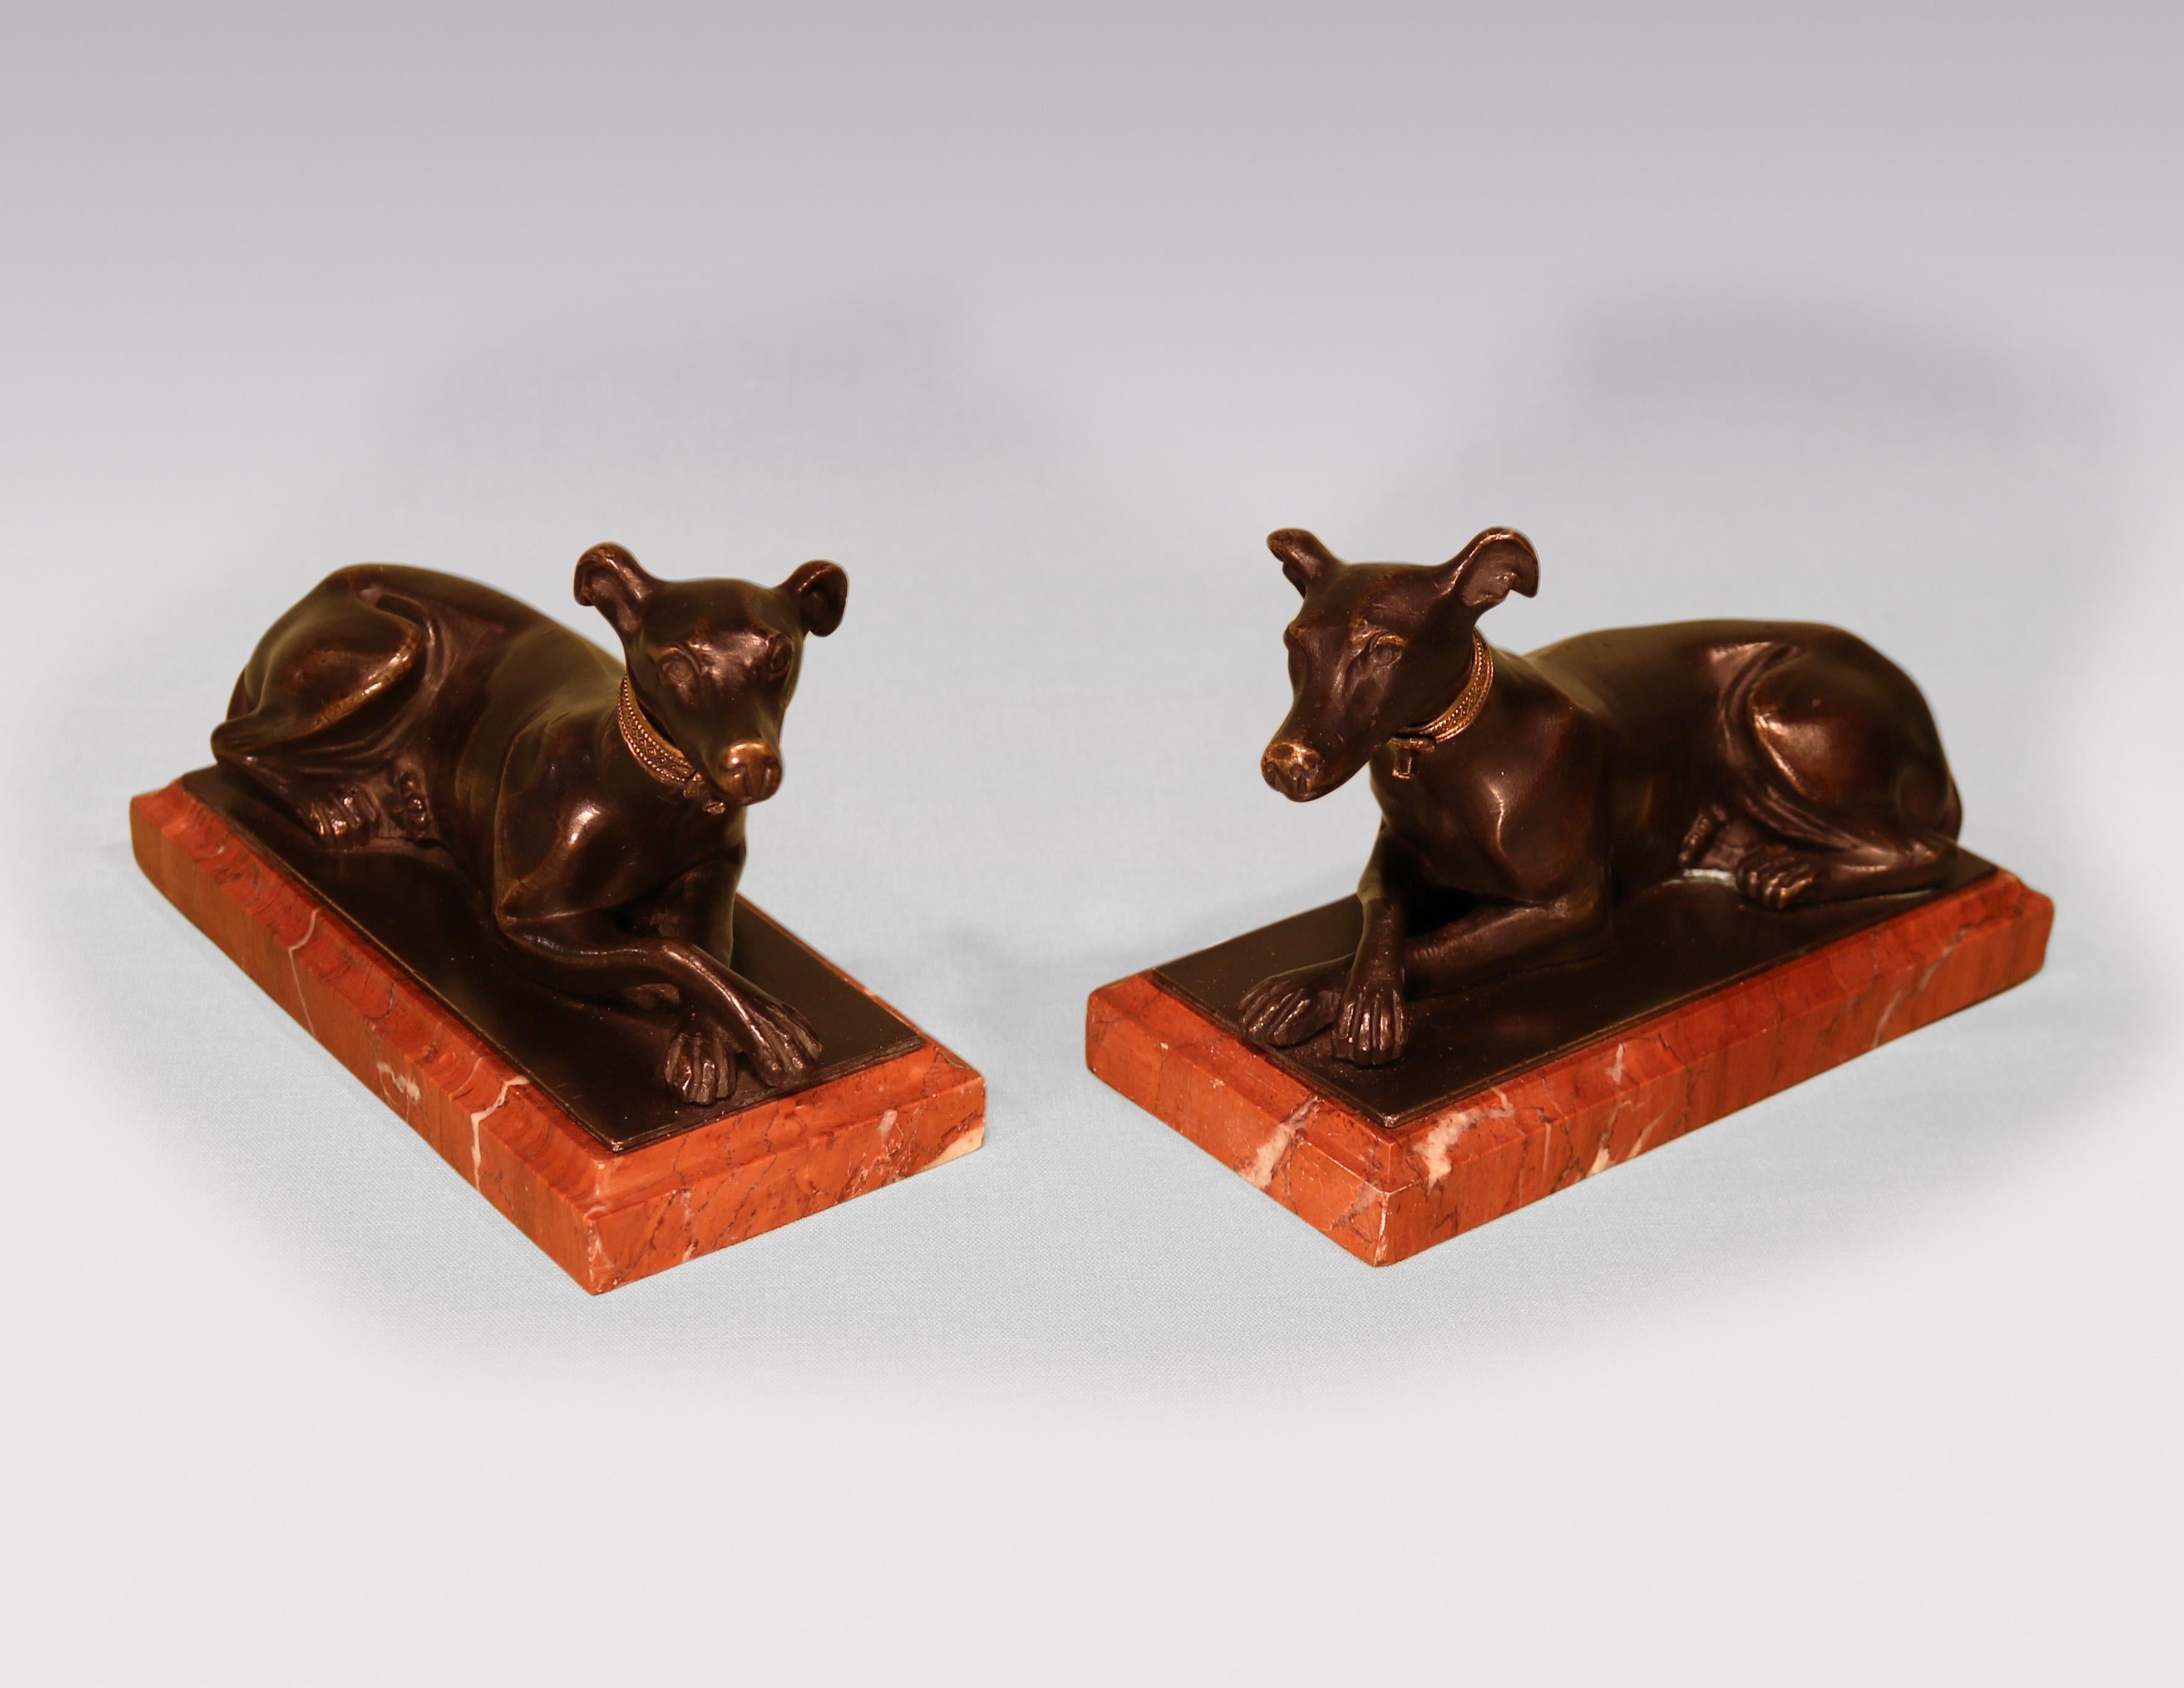 A fine quality pair of early 19th Century Regency period well-cast bronze Models of Greyhounds, having engine-turned gilt-brass collars, on moulded edged red marble bases.